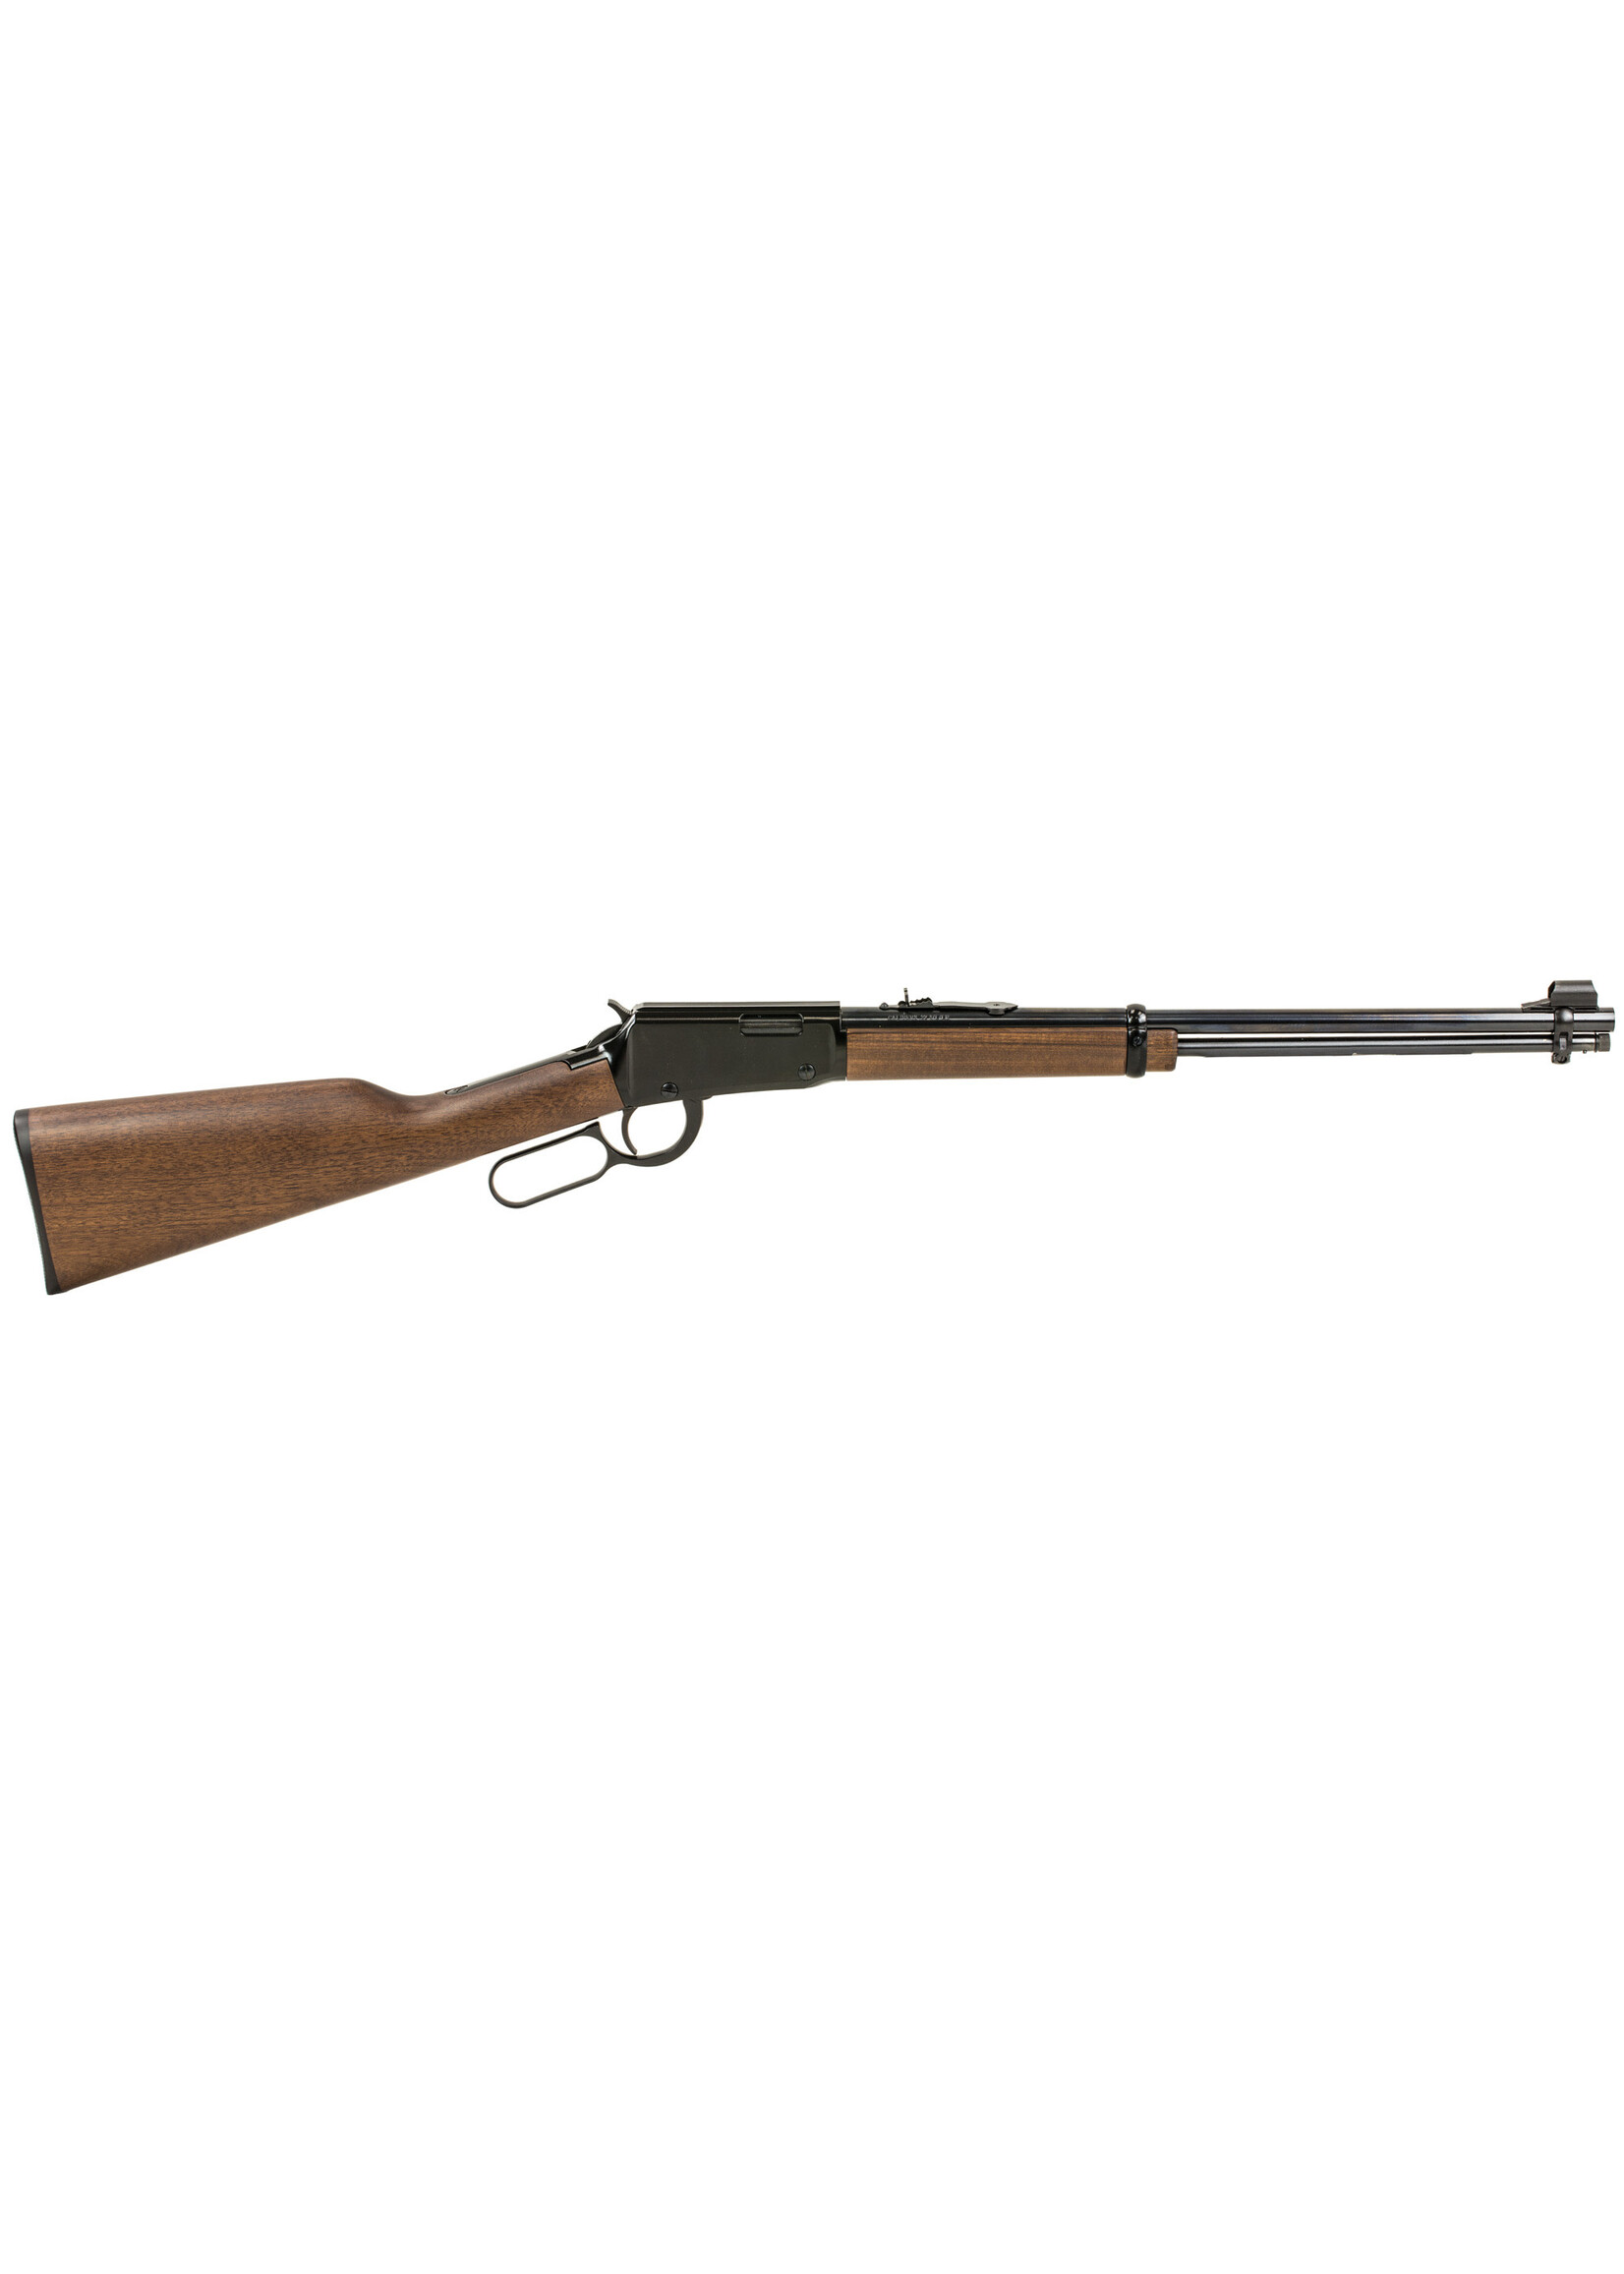 HENRY REPEATING ARMS CLASSIC LEVER ACTION .22LR 15RD 18.5"